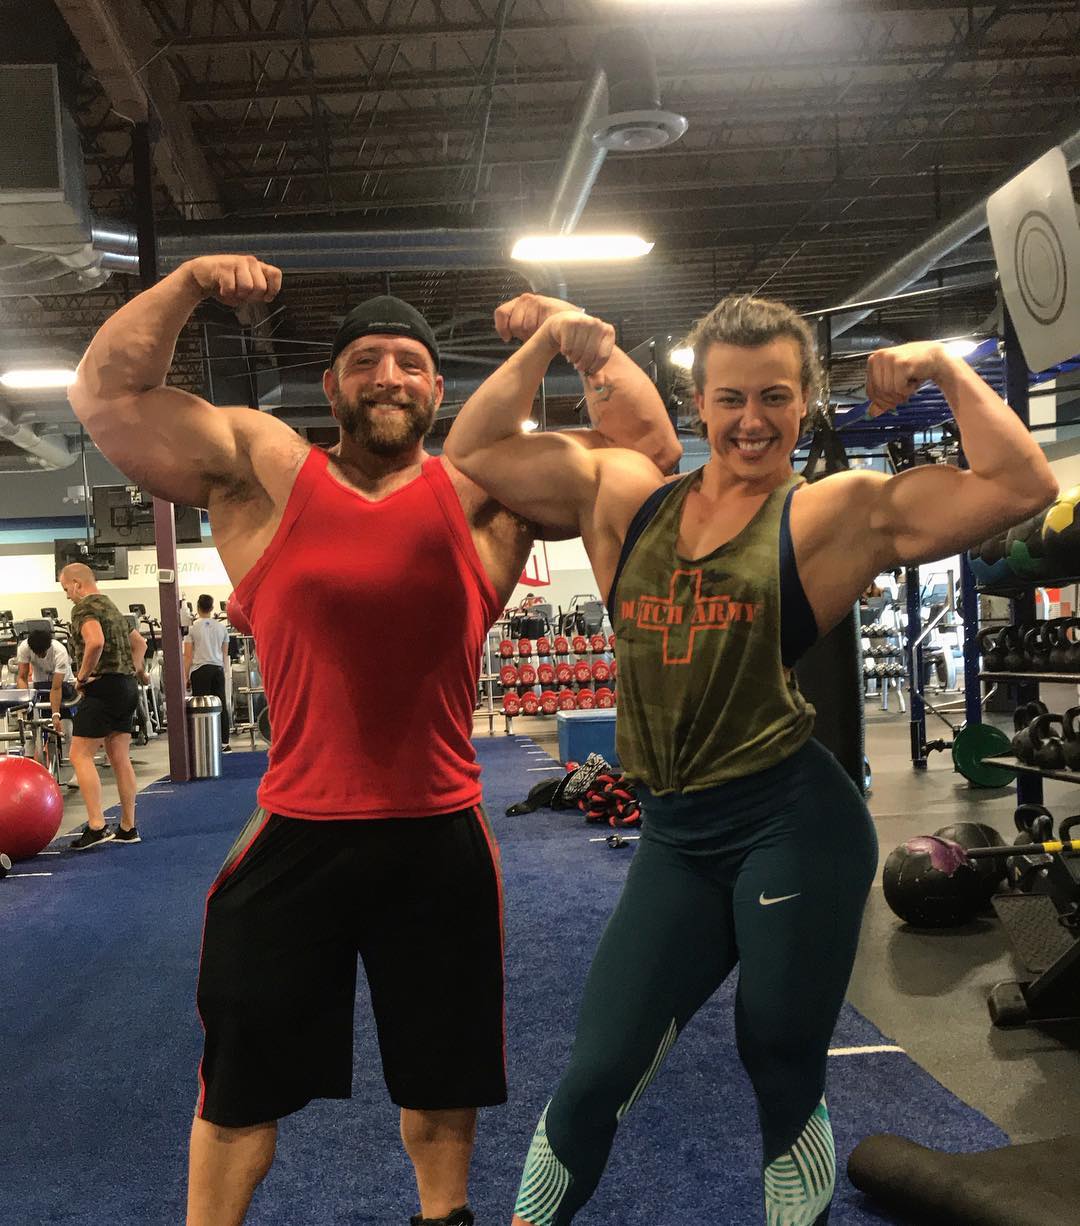 chelsea kline girls with muscle